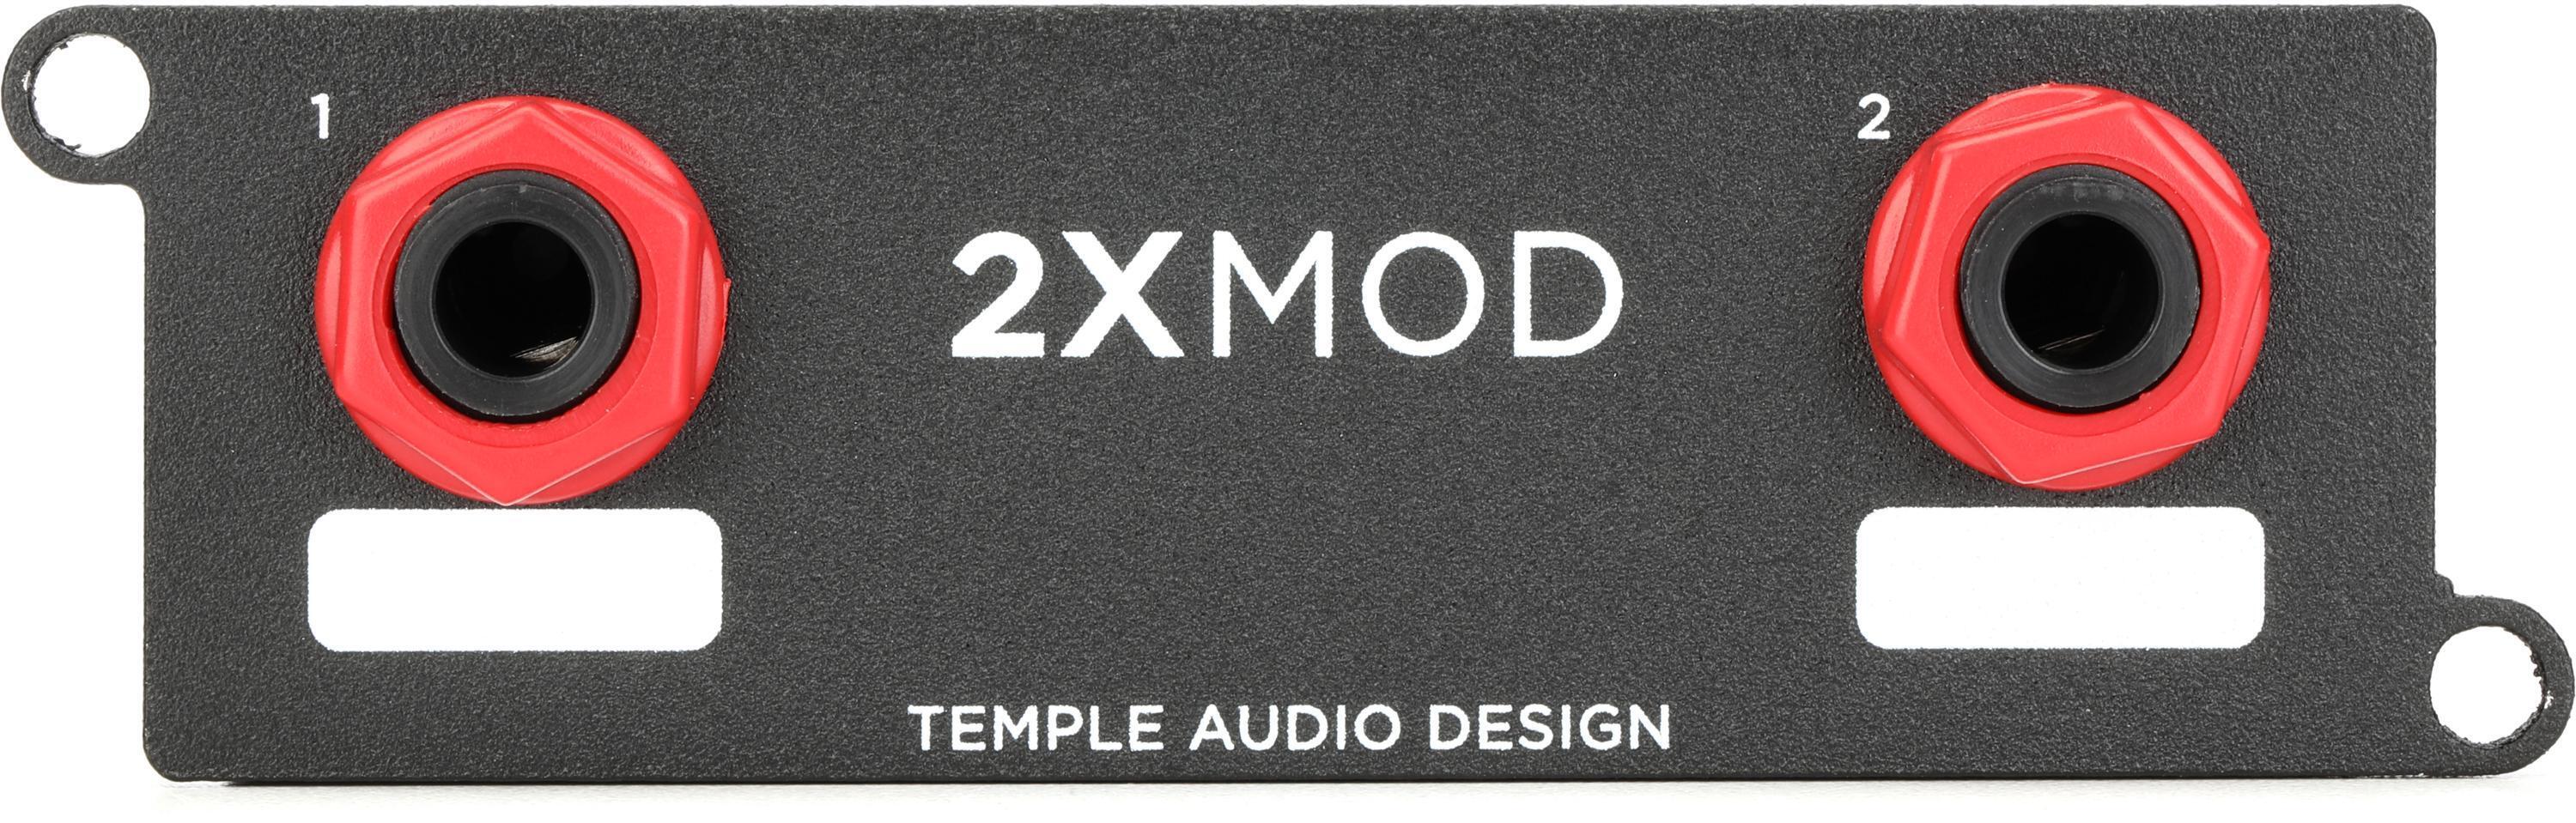 Temple Audio Midi 5-Pin DIN Connector | Sweetwater